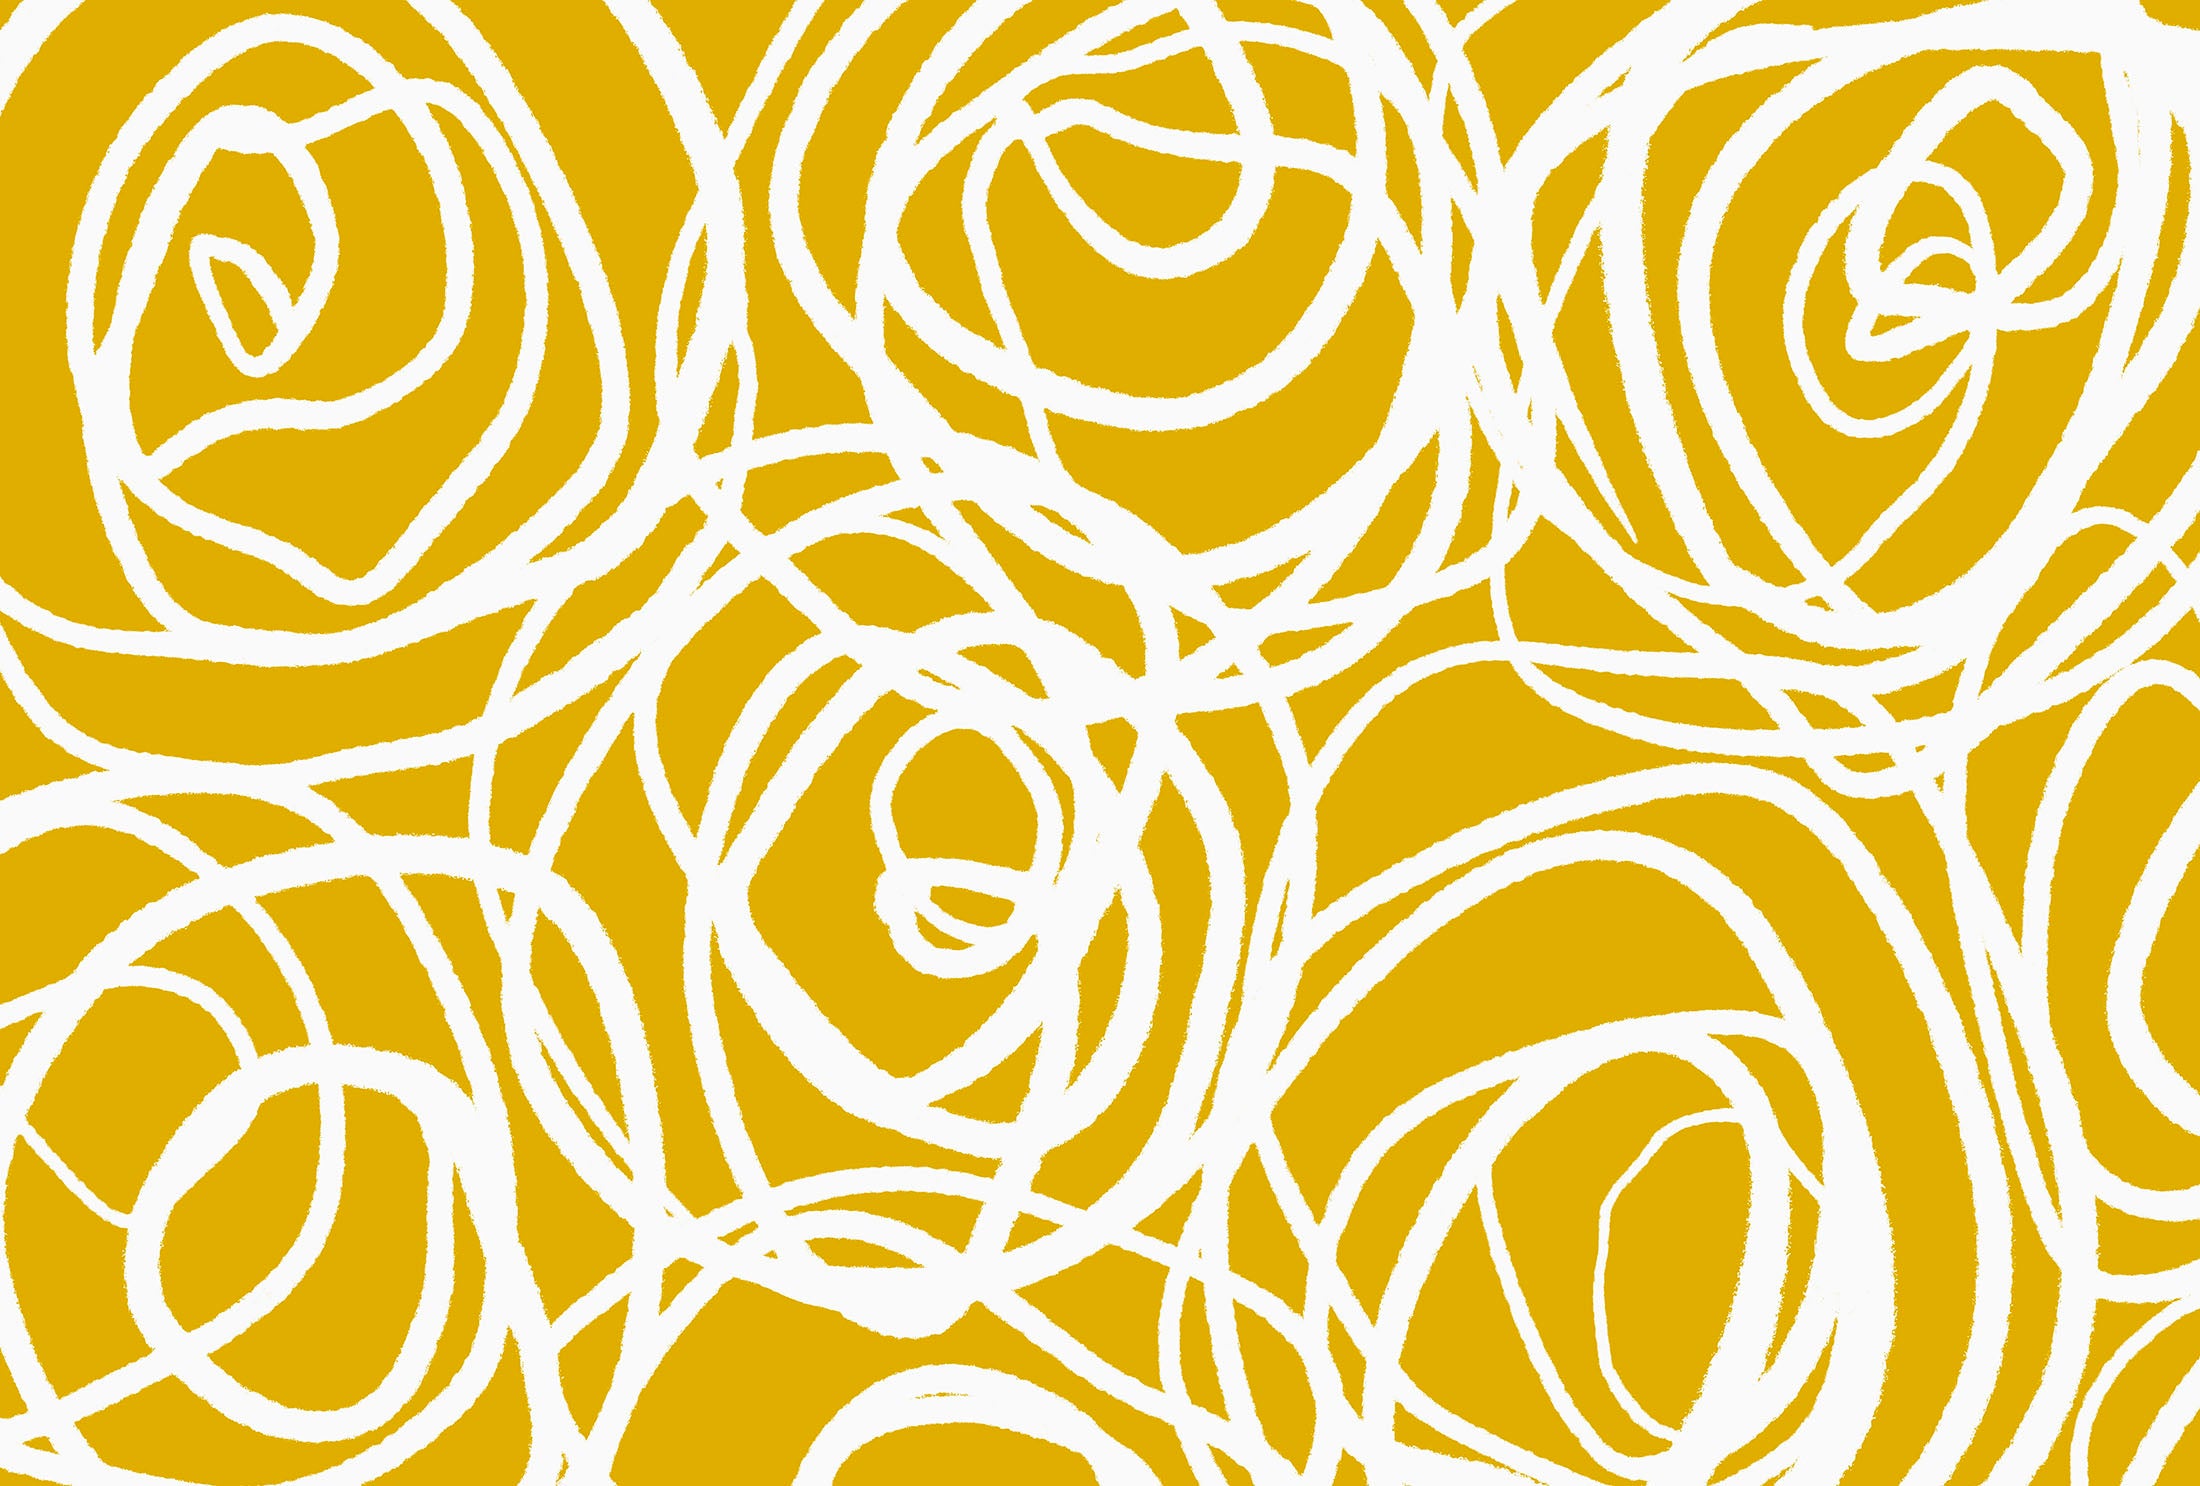 Swirl Paper Placemats are a bright and fun way to dress up any table.